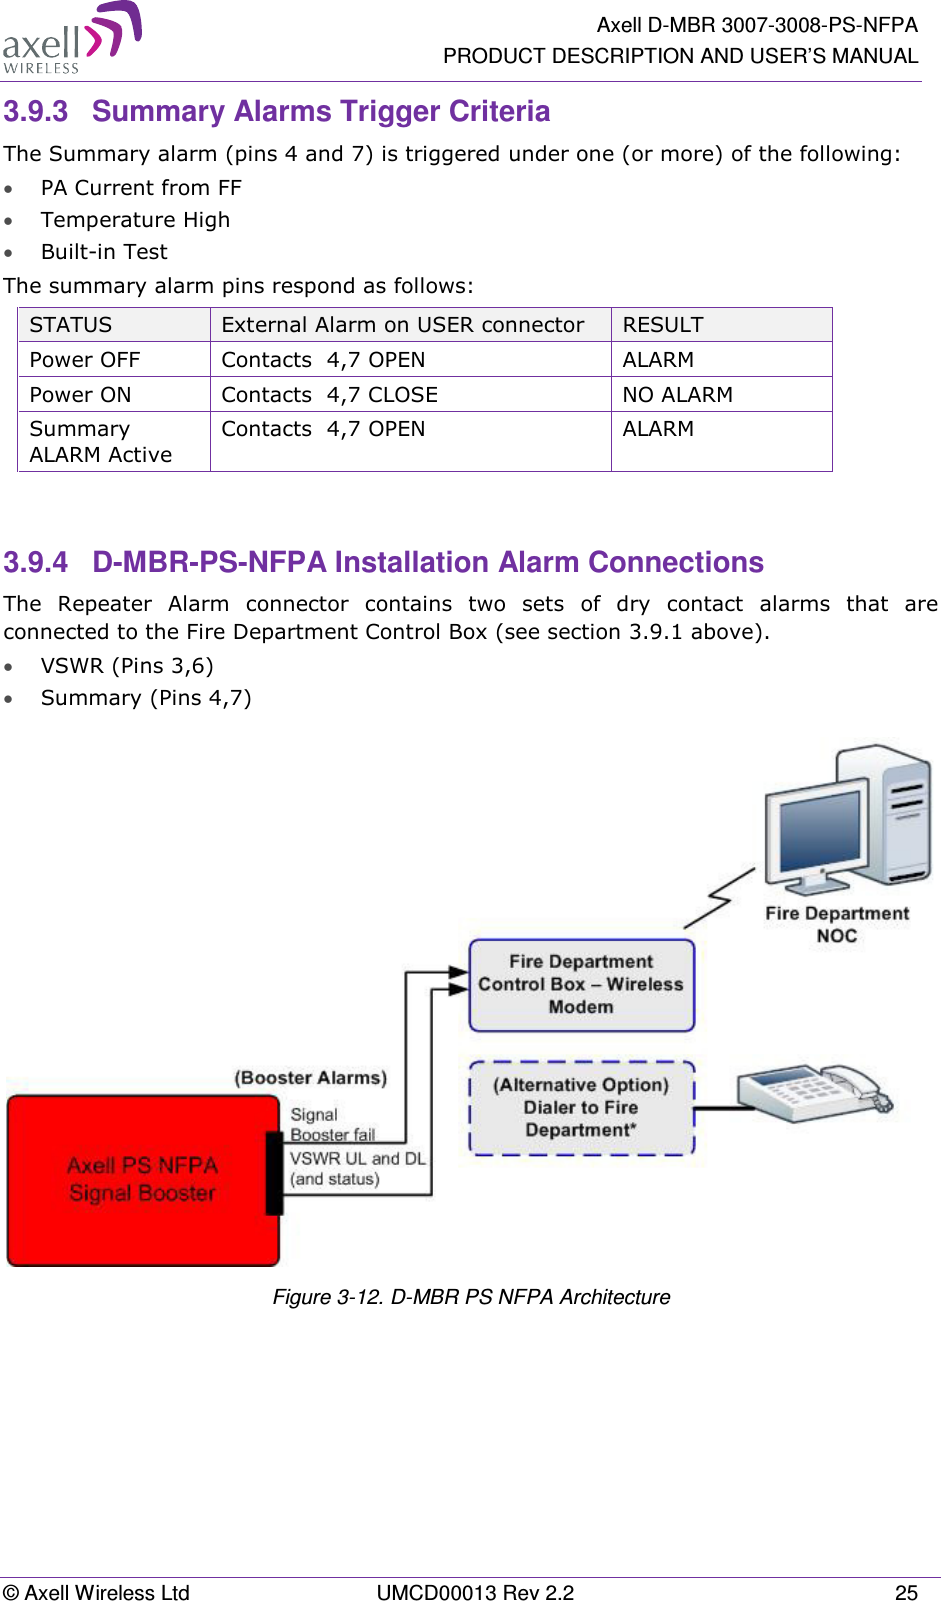   Axell D-MBR 3007-3008-PS-NFPA PRODUCT DESCRIPTION AND USER’S MANUAL © Axell Wireless Ltd  UMCD00013 Rev 2.2  25 3.9.3  Summary Alarms Trigger Criteria The Summary alarm (pins 4 and 7) is triggered under one (or more) of the following: • PA Current from FF  • Temperature High  • Built-in Test The summary alarm pins respond as follows: STATUS External Alarm on USER connector RESULT Power OFF  Contacts  4,7 OPEN  ALARM Power ON  Contacts  4,7 CLOSE  NO ALARM  Summary ALARM Active  Contacts  4,7 OPEN  ALARM    3.9.4  D-MBR-PS-NFPA Installation Alarm Connections The  Repeater  Alarm  connector  contains  two  sets  of  dry  contact  alarms  that  are connected to the Fire Department Control Box (see section  3.9.1 above). • VSWR (Pins 3,6) • Summary (Pins 4,7)   Figure  3-12. D-MBR PS NFPA Architecture   